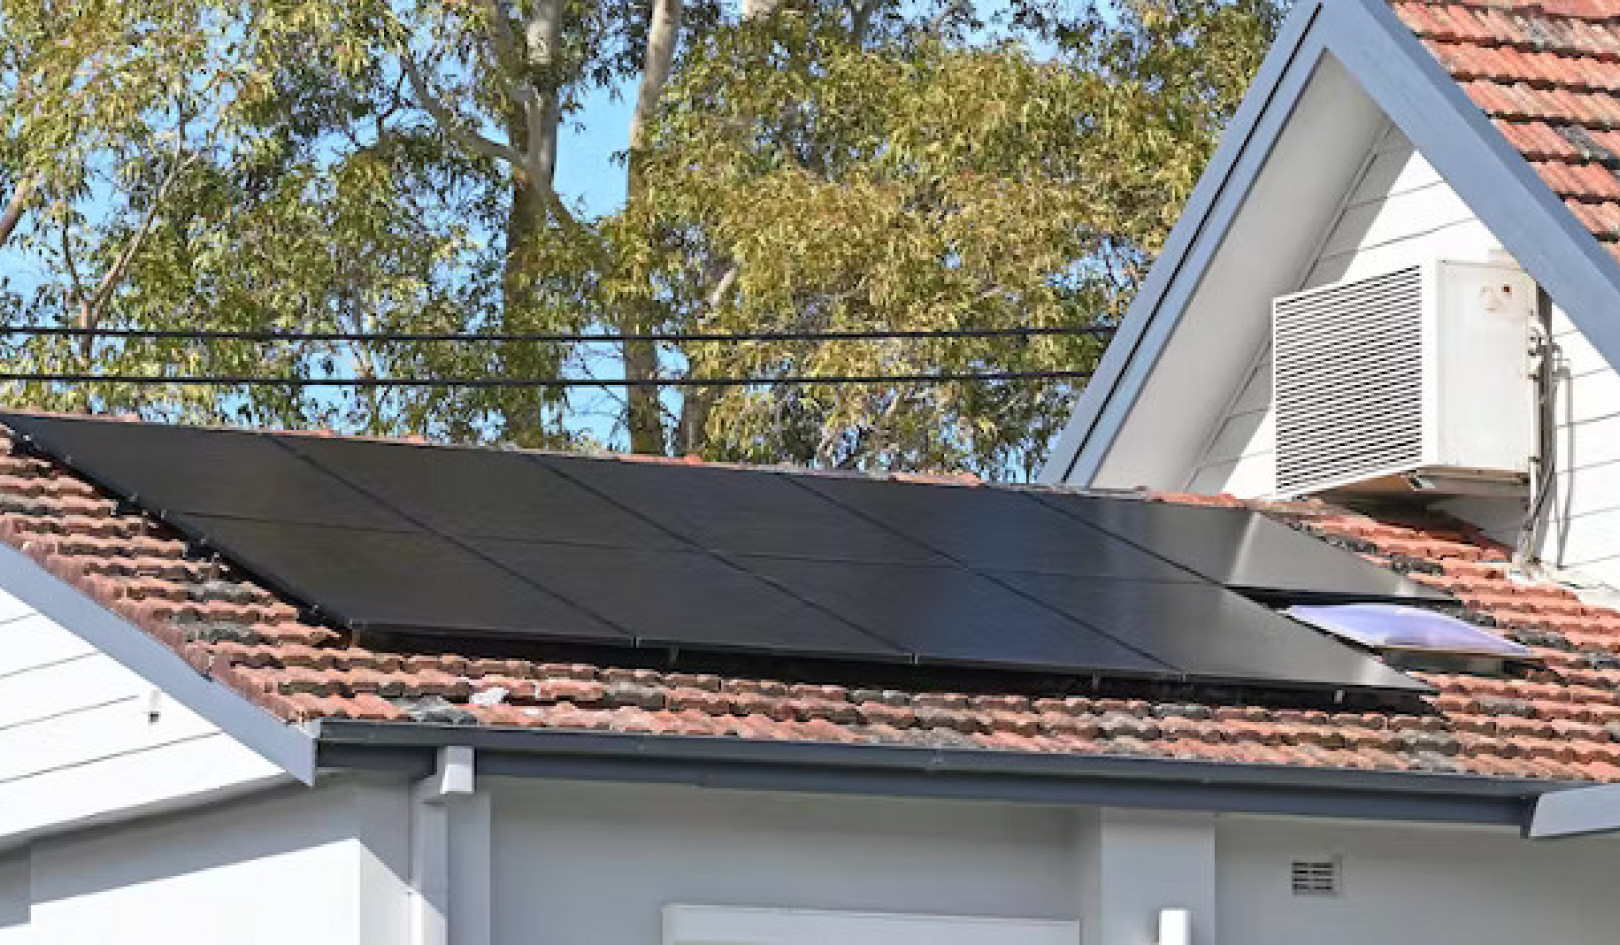 Rooftop Solar: The Answer to Rising Summer Energy Needs